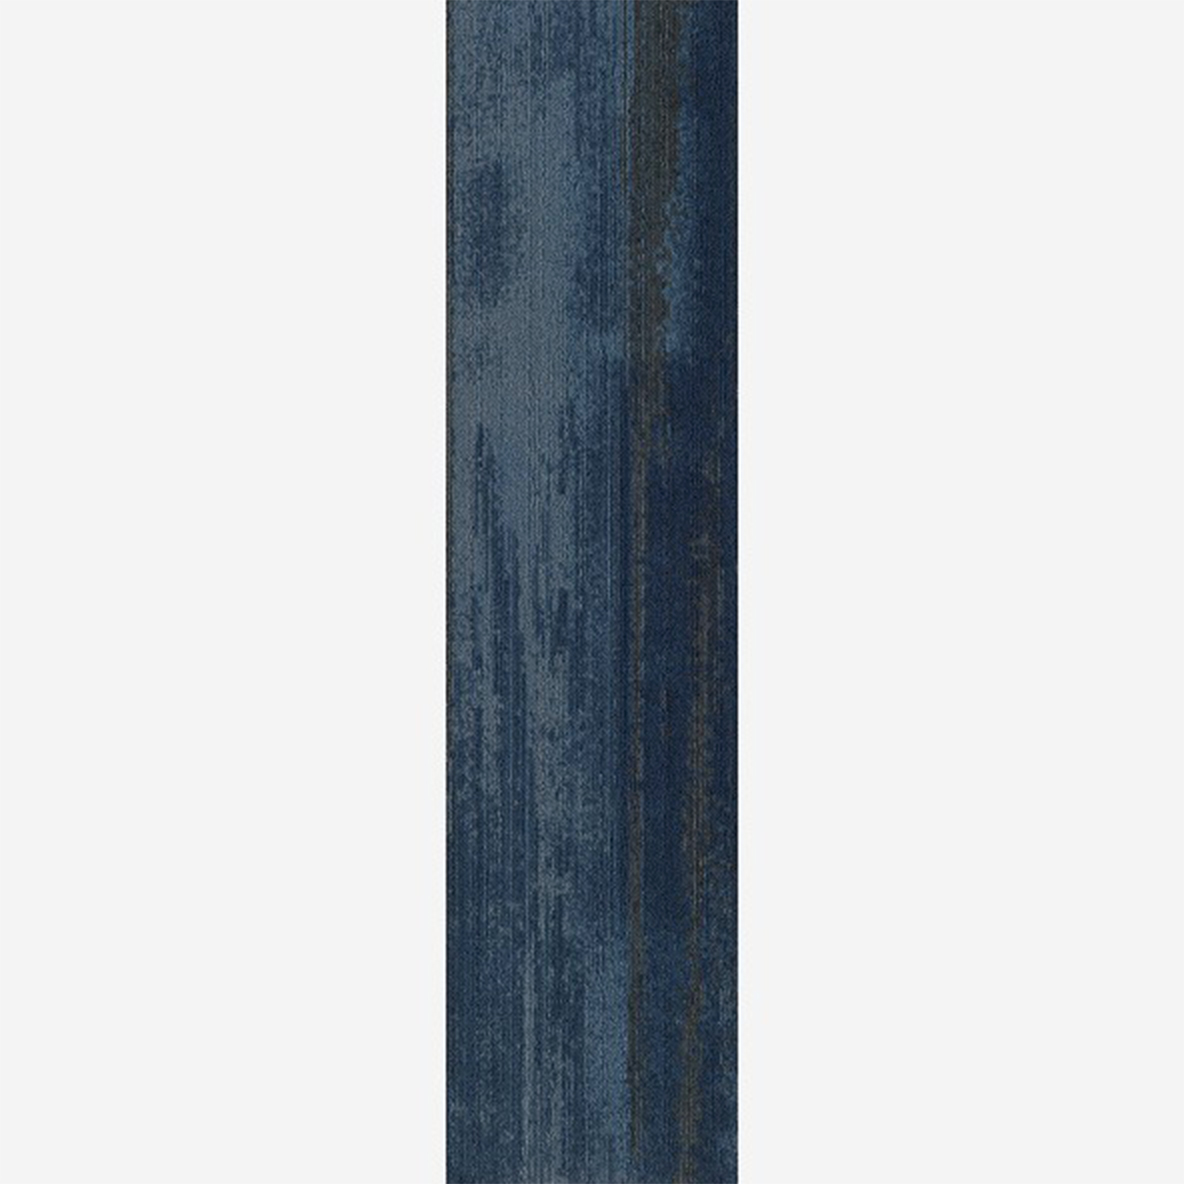 Ingrained Commercial Carpet Plank Colors .28 Inch x 25 cm x 1 Meter Per Plank Cerulean Navy Full